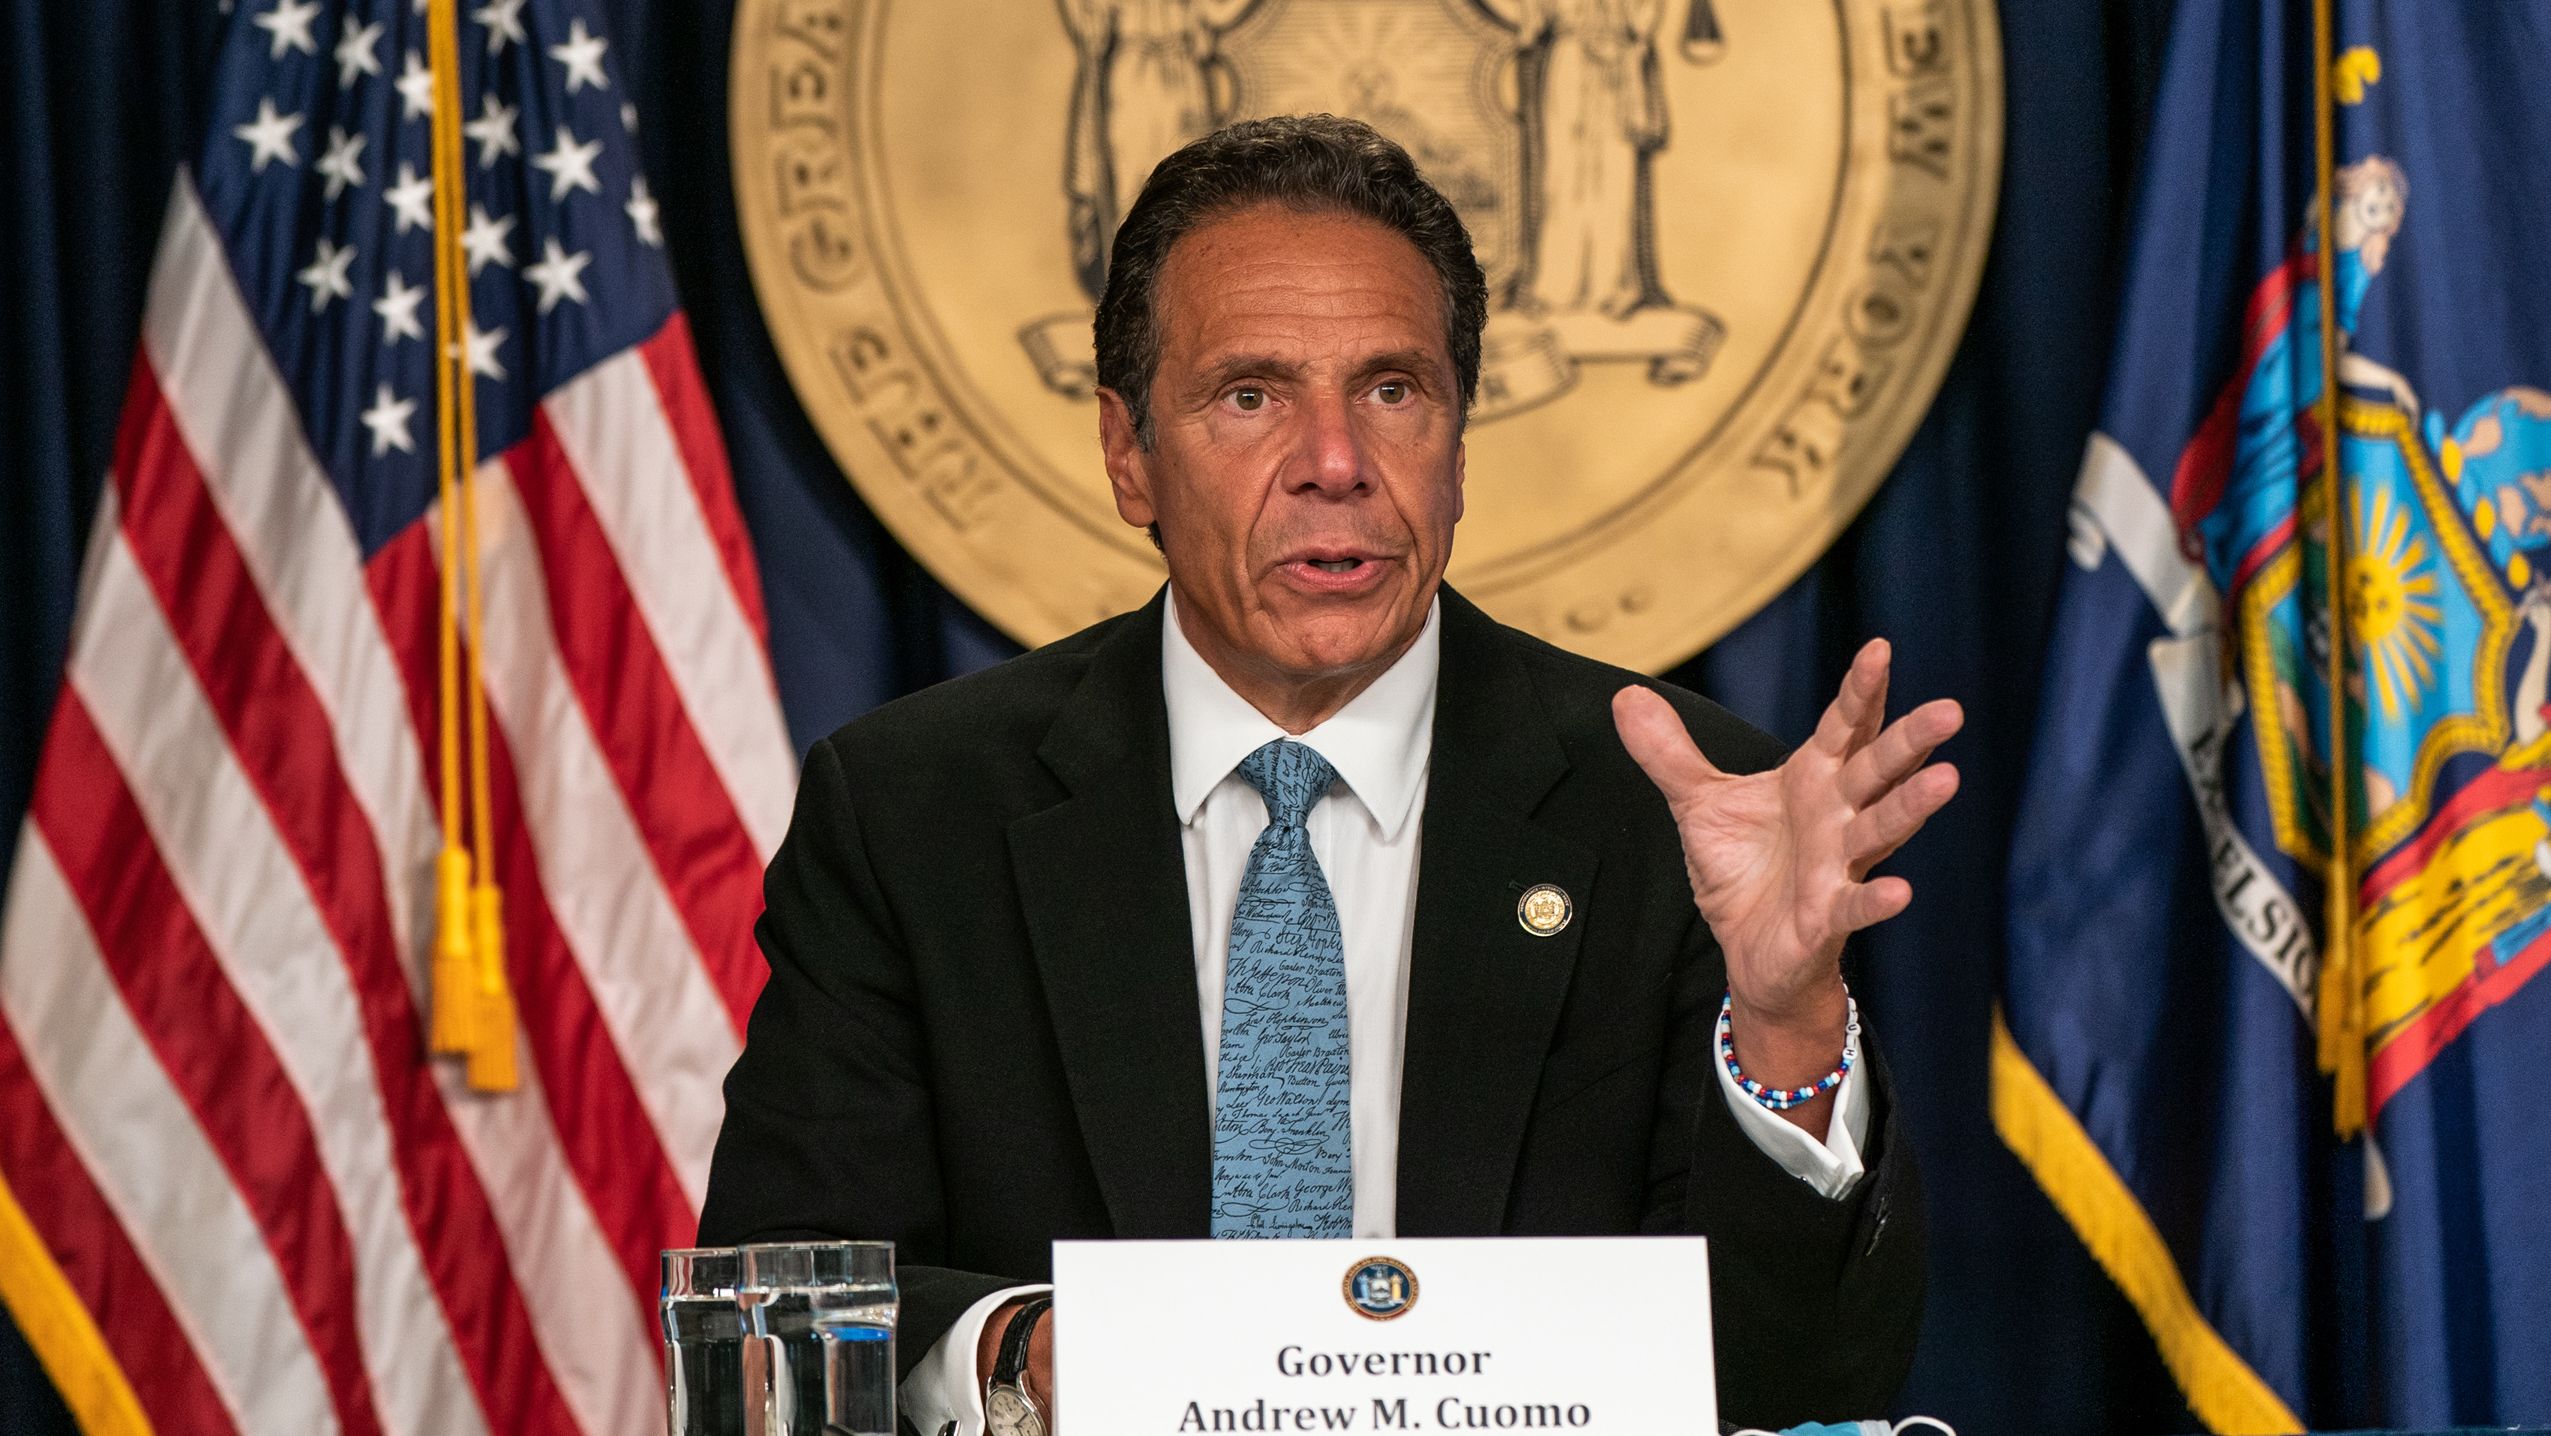 New York Gov. Andrew Cuomo said the state's coronavirus infection rate is 1 percent, which is better than the threshold the state had set to allow schools to reopen.